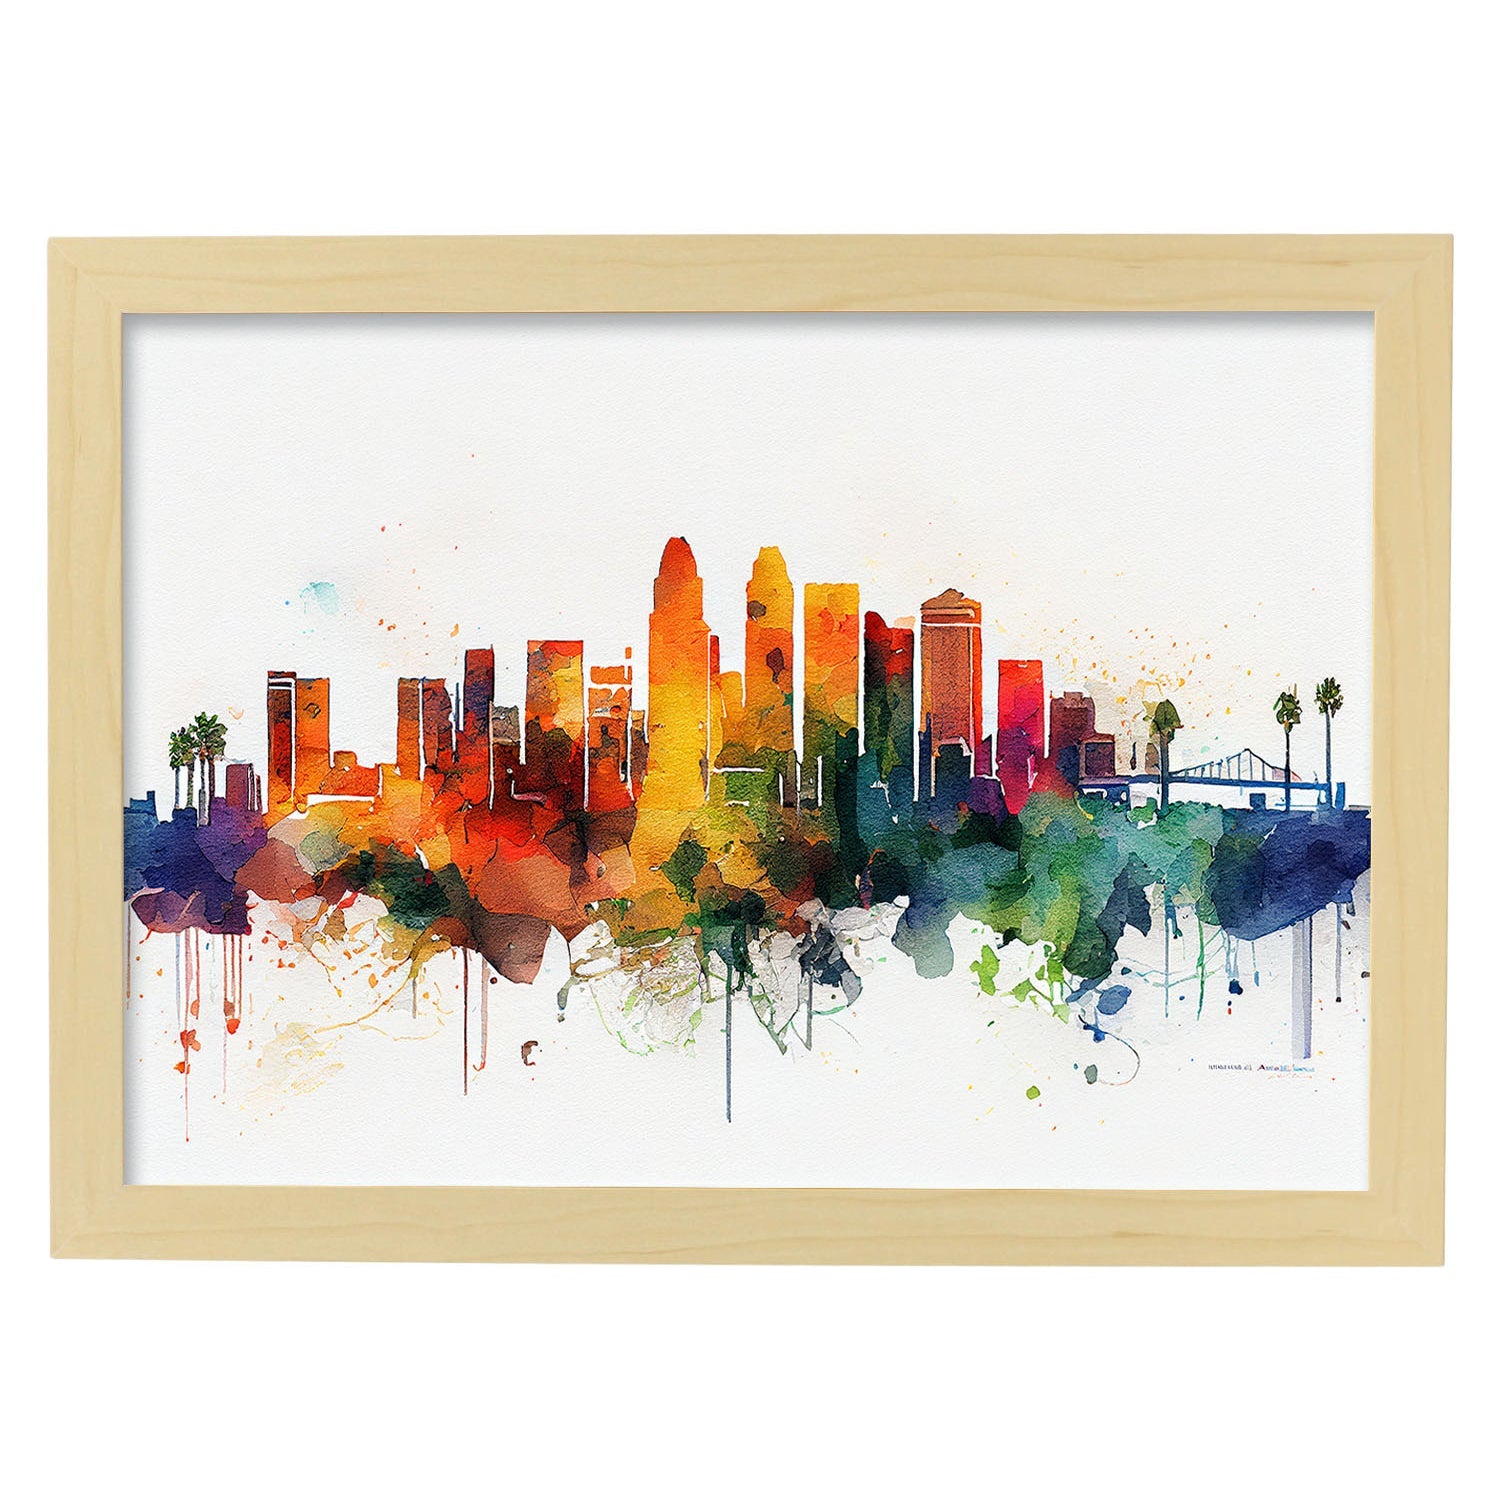 Nacnic watercolor of a skyline of the city of Los Angeles_2. Aesthetic Wall Art Prints for Bedroom or Living Room Design.-Artwork-Nacnic-A4-Marco Madera Clara-Nacnic Estudio SL